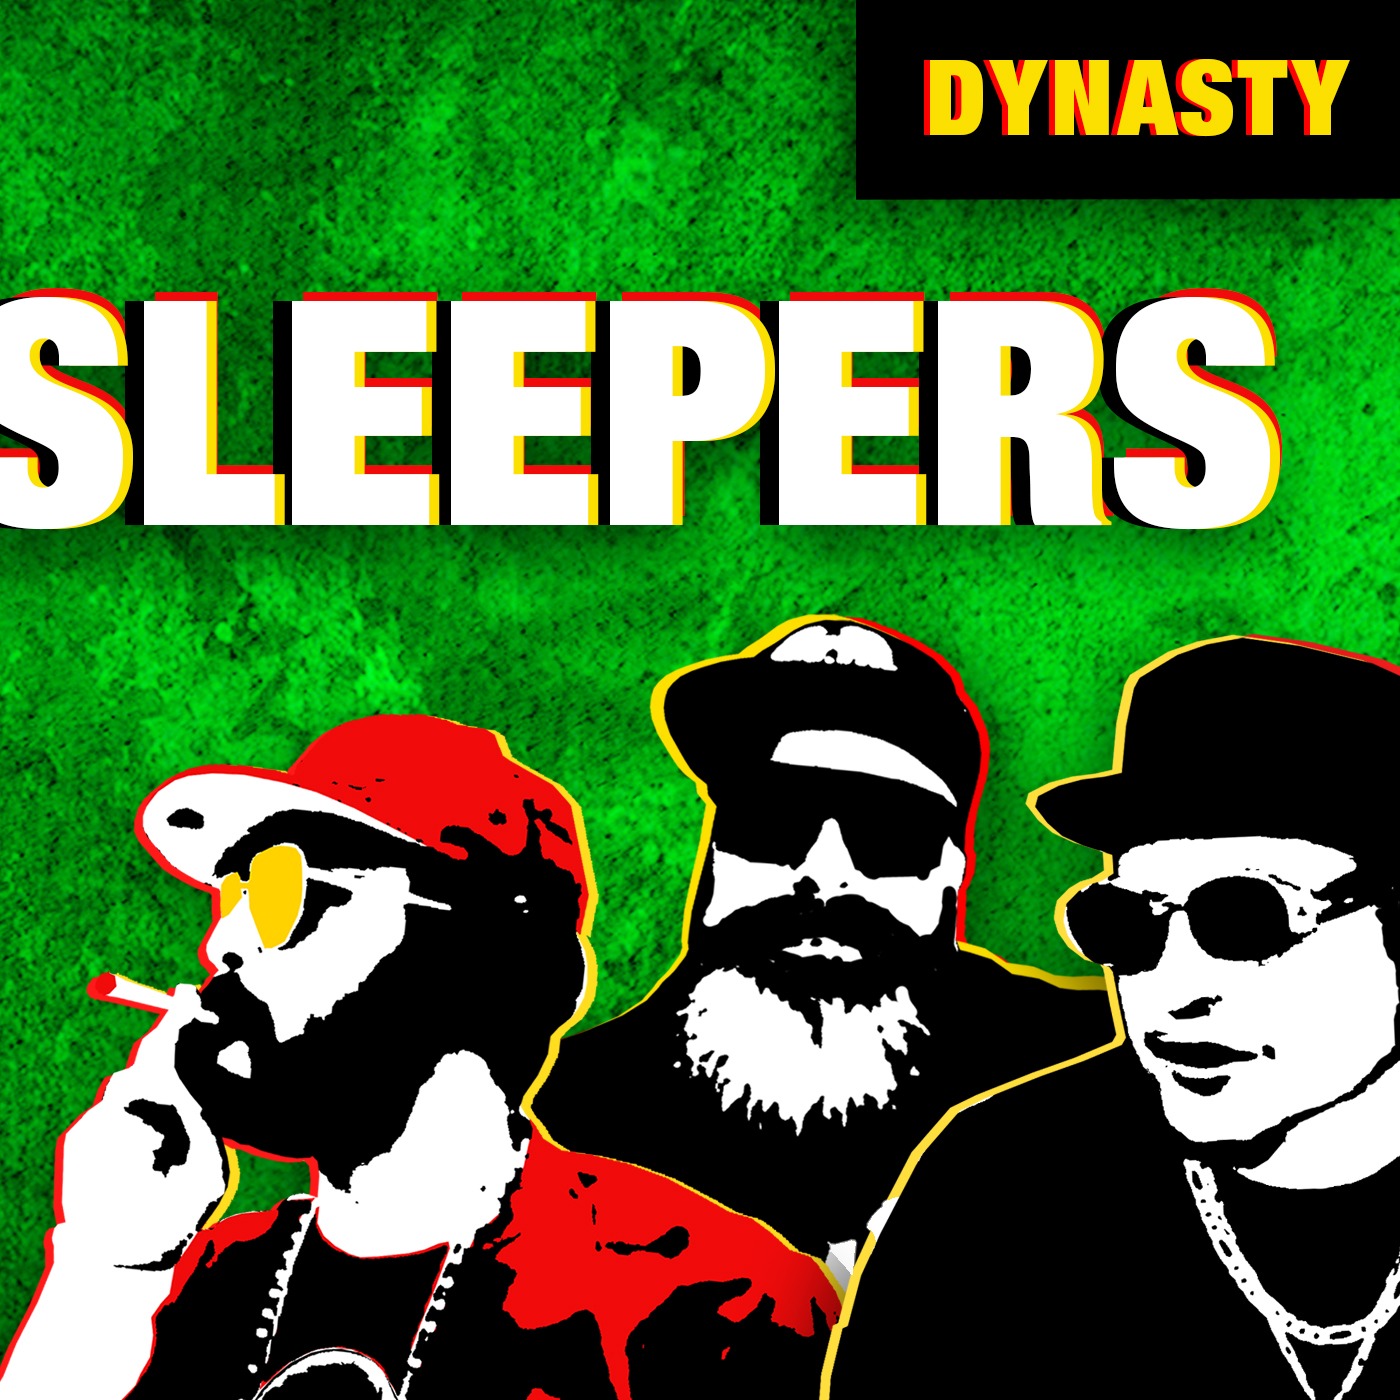 Sleepers to Target in Start Ups | Dynasty Fantasy Football Image